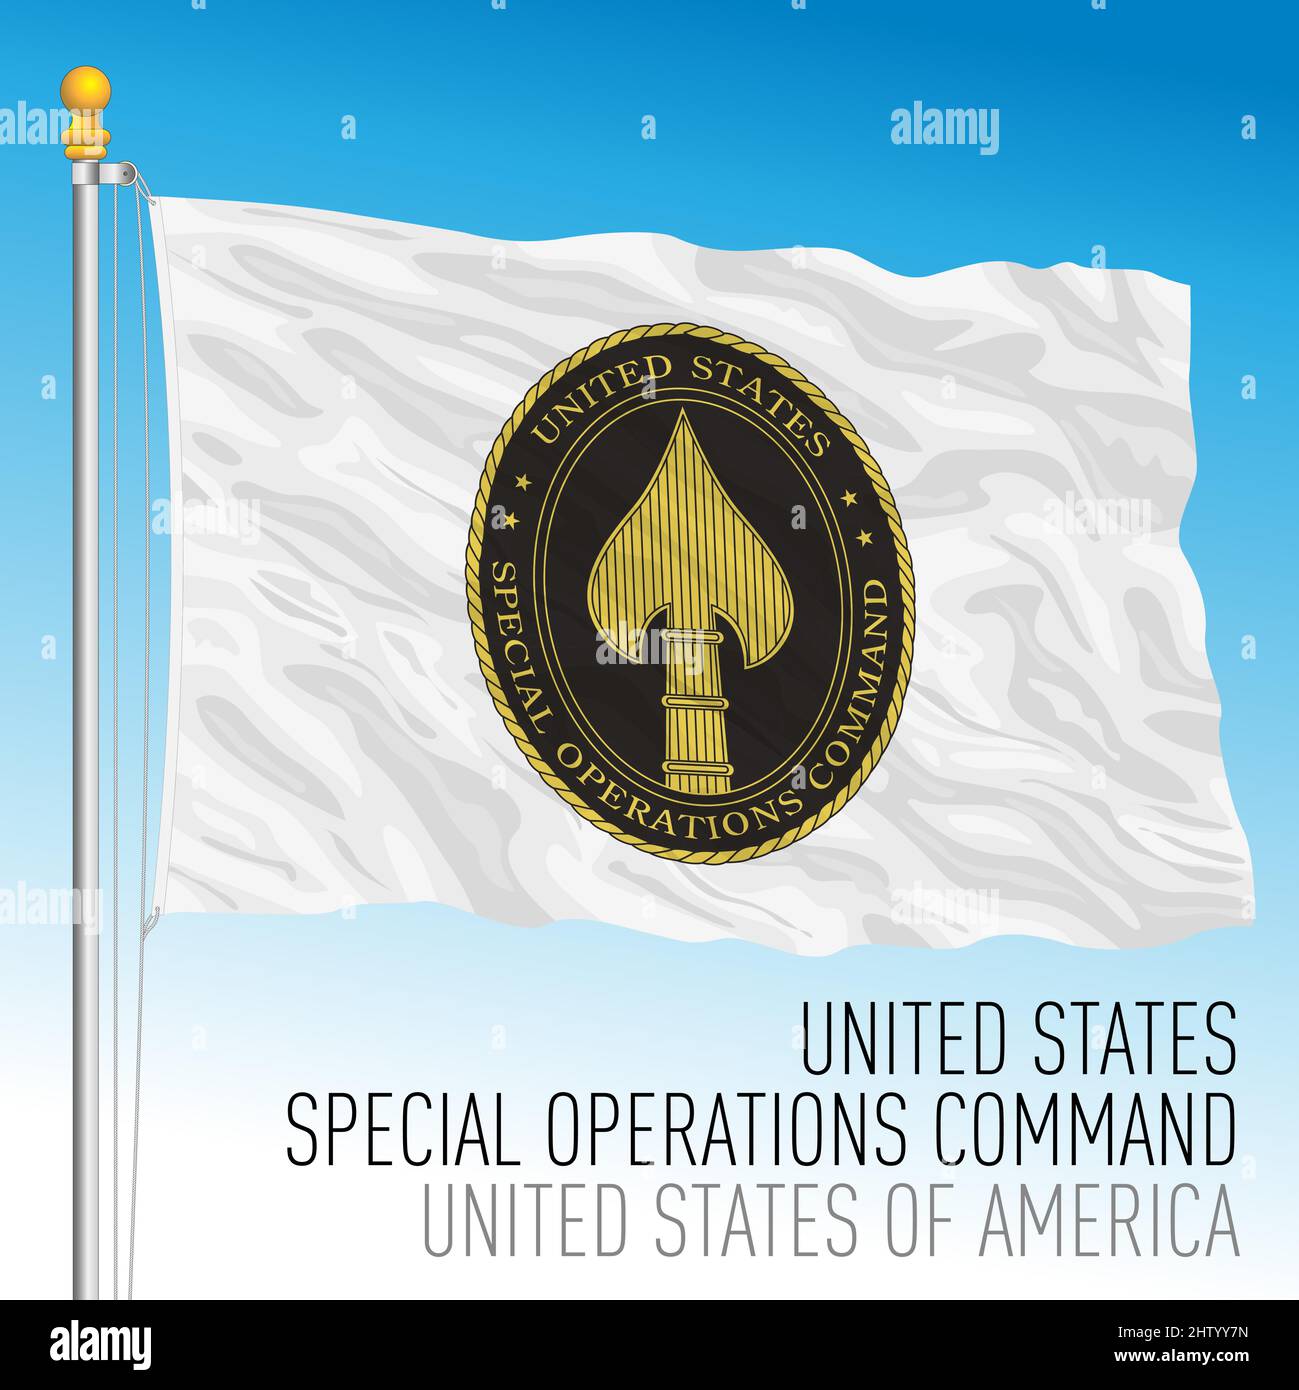 United States Special Operations Command flag, USA, vector illustration Stock Vector